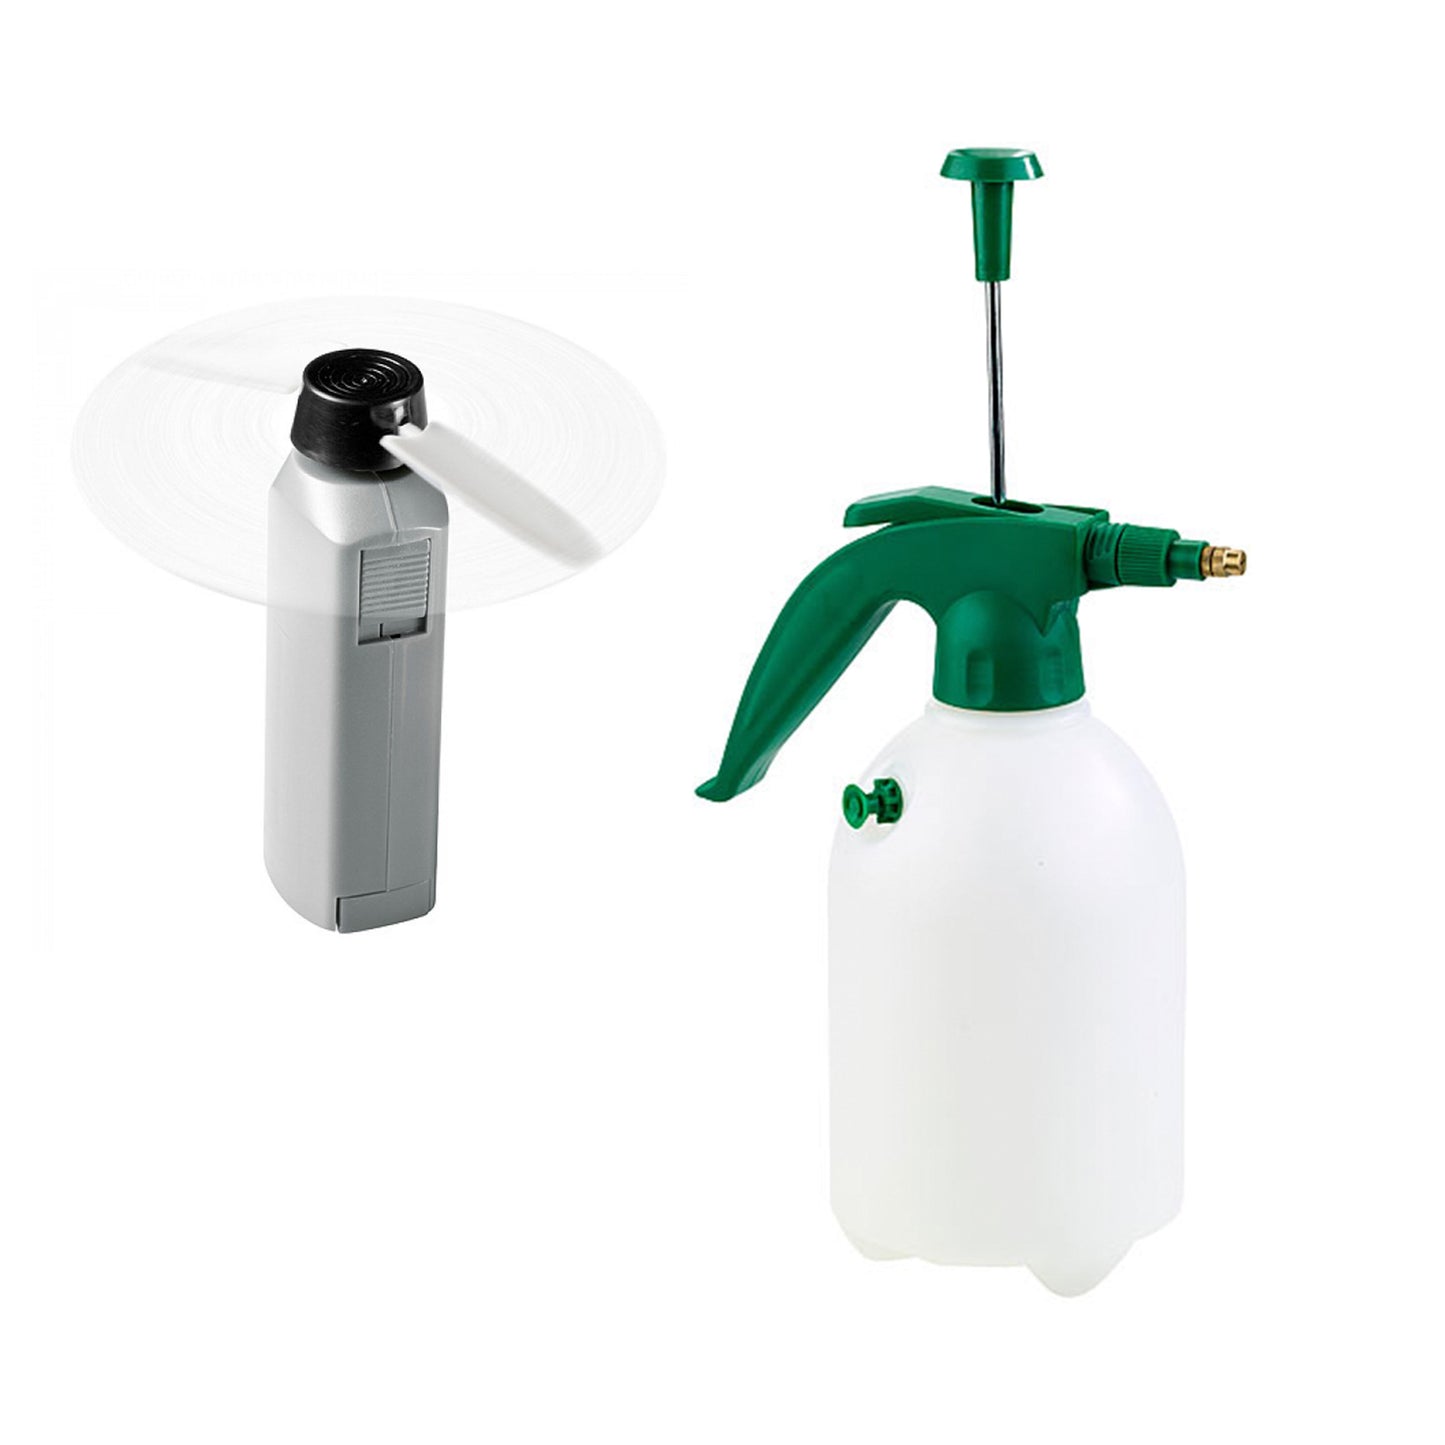 Anti heat kit M with hand fan and pressure spray bottle